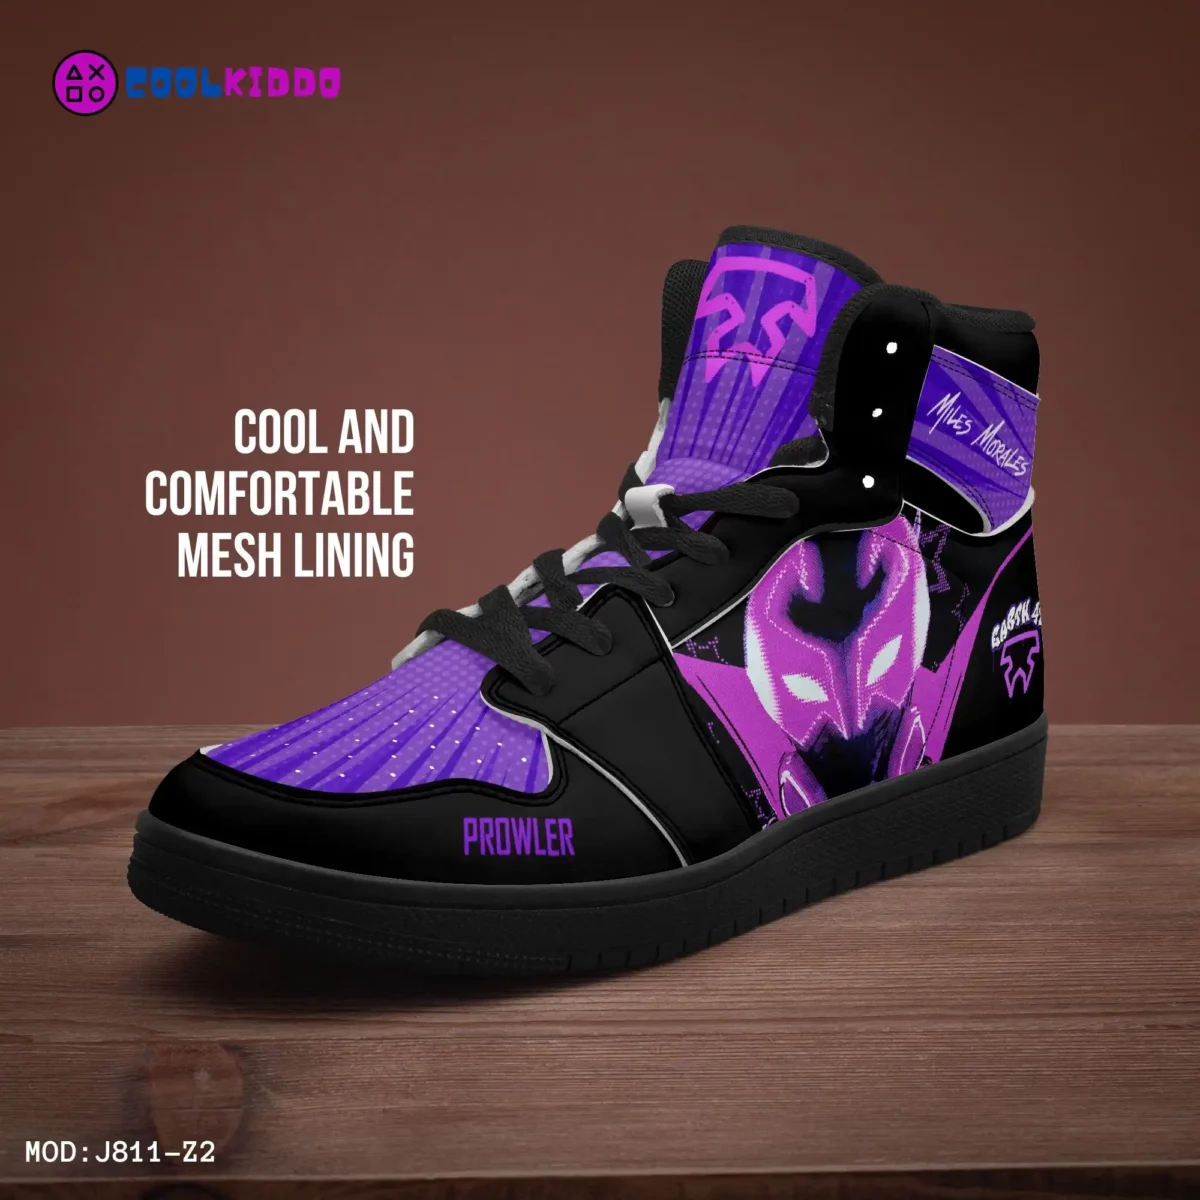 Custom Miles Morales Spiderman Shoes Spider Verse Earth 42 Prowler High-Top Leather Sneakers Cool Kiddo 16